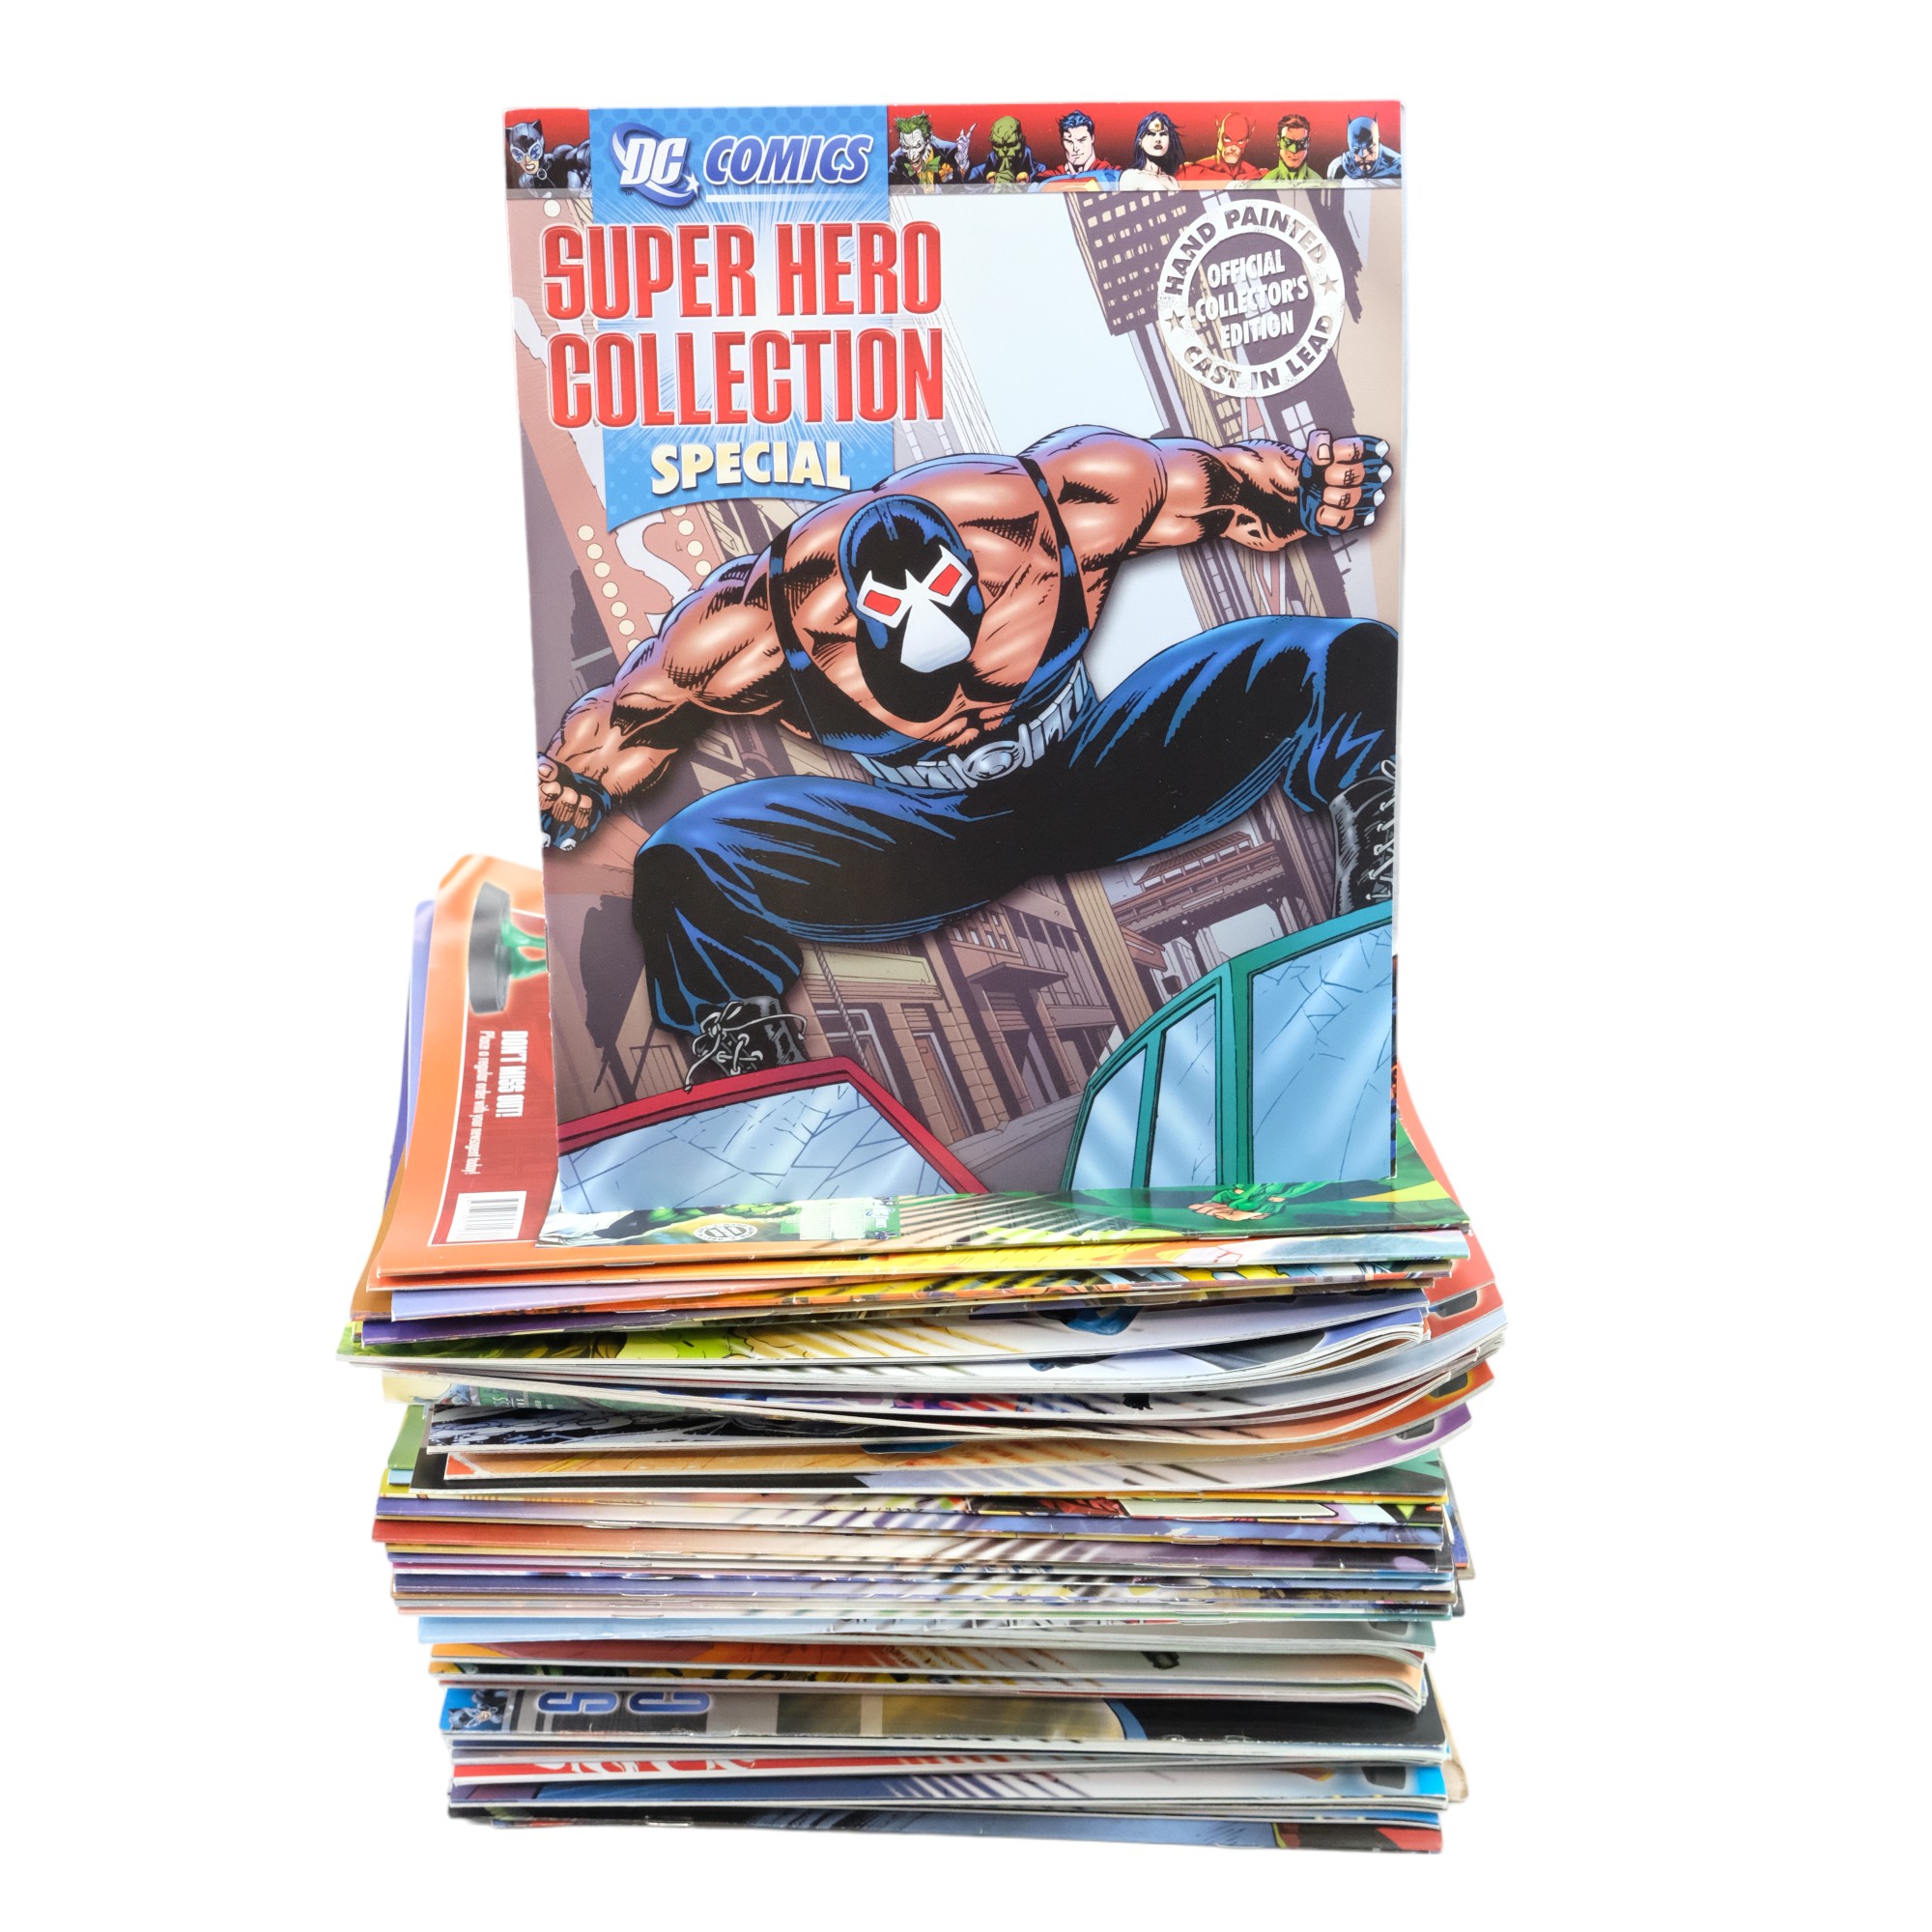 "DC Comics Super Hero Collection", a complete set of 120 figurines and magazines by Eaglemoss - Image 5 of 9